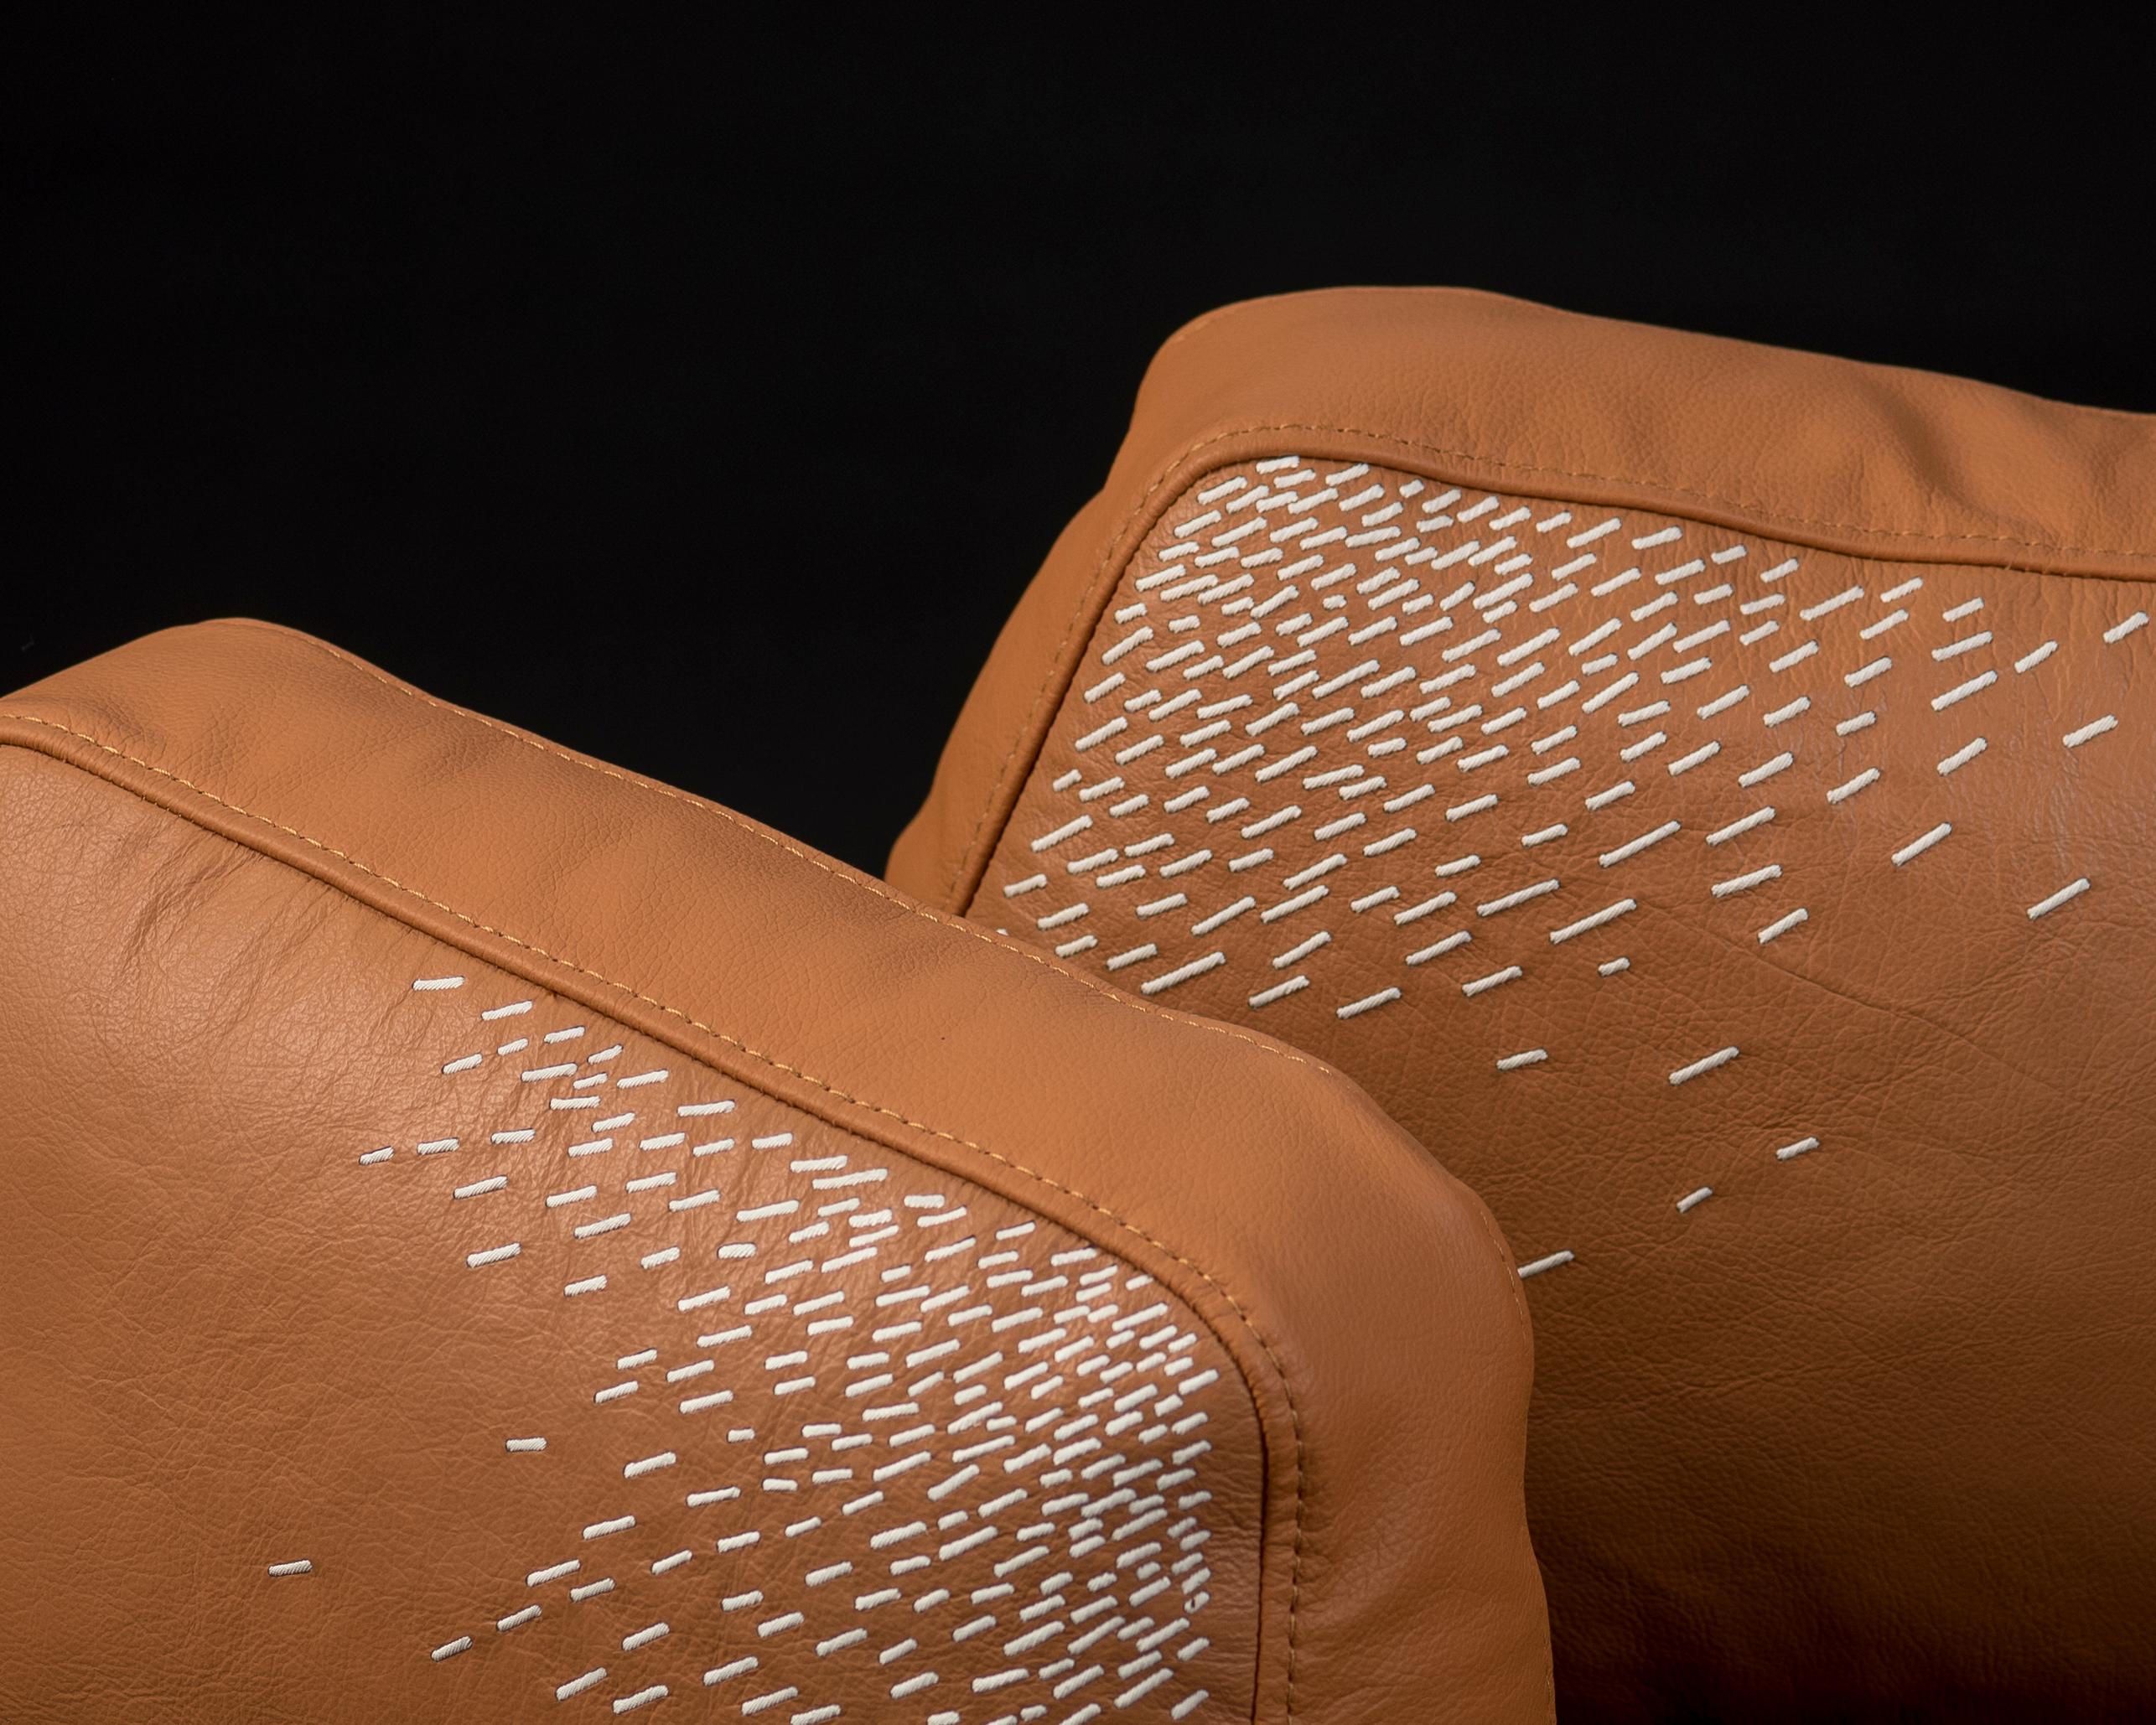 Piteado is the embodiment of Jalisco’s craftsmanship: every stich of the maguey fiber on the tinted leather carries with it centuries of tradition. The Pita cushions reflect the timelessness of the technique, whose delicate embroidery shines through